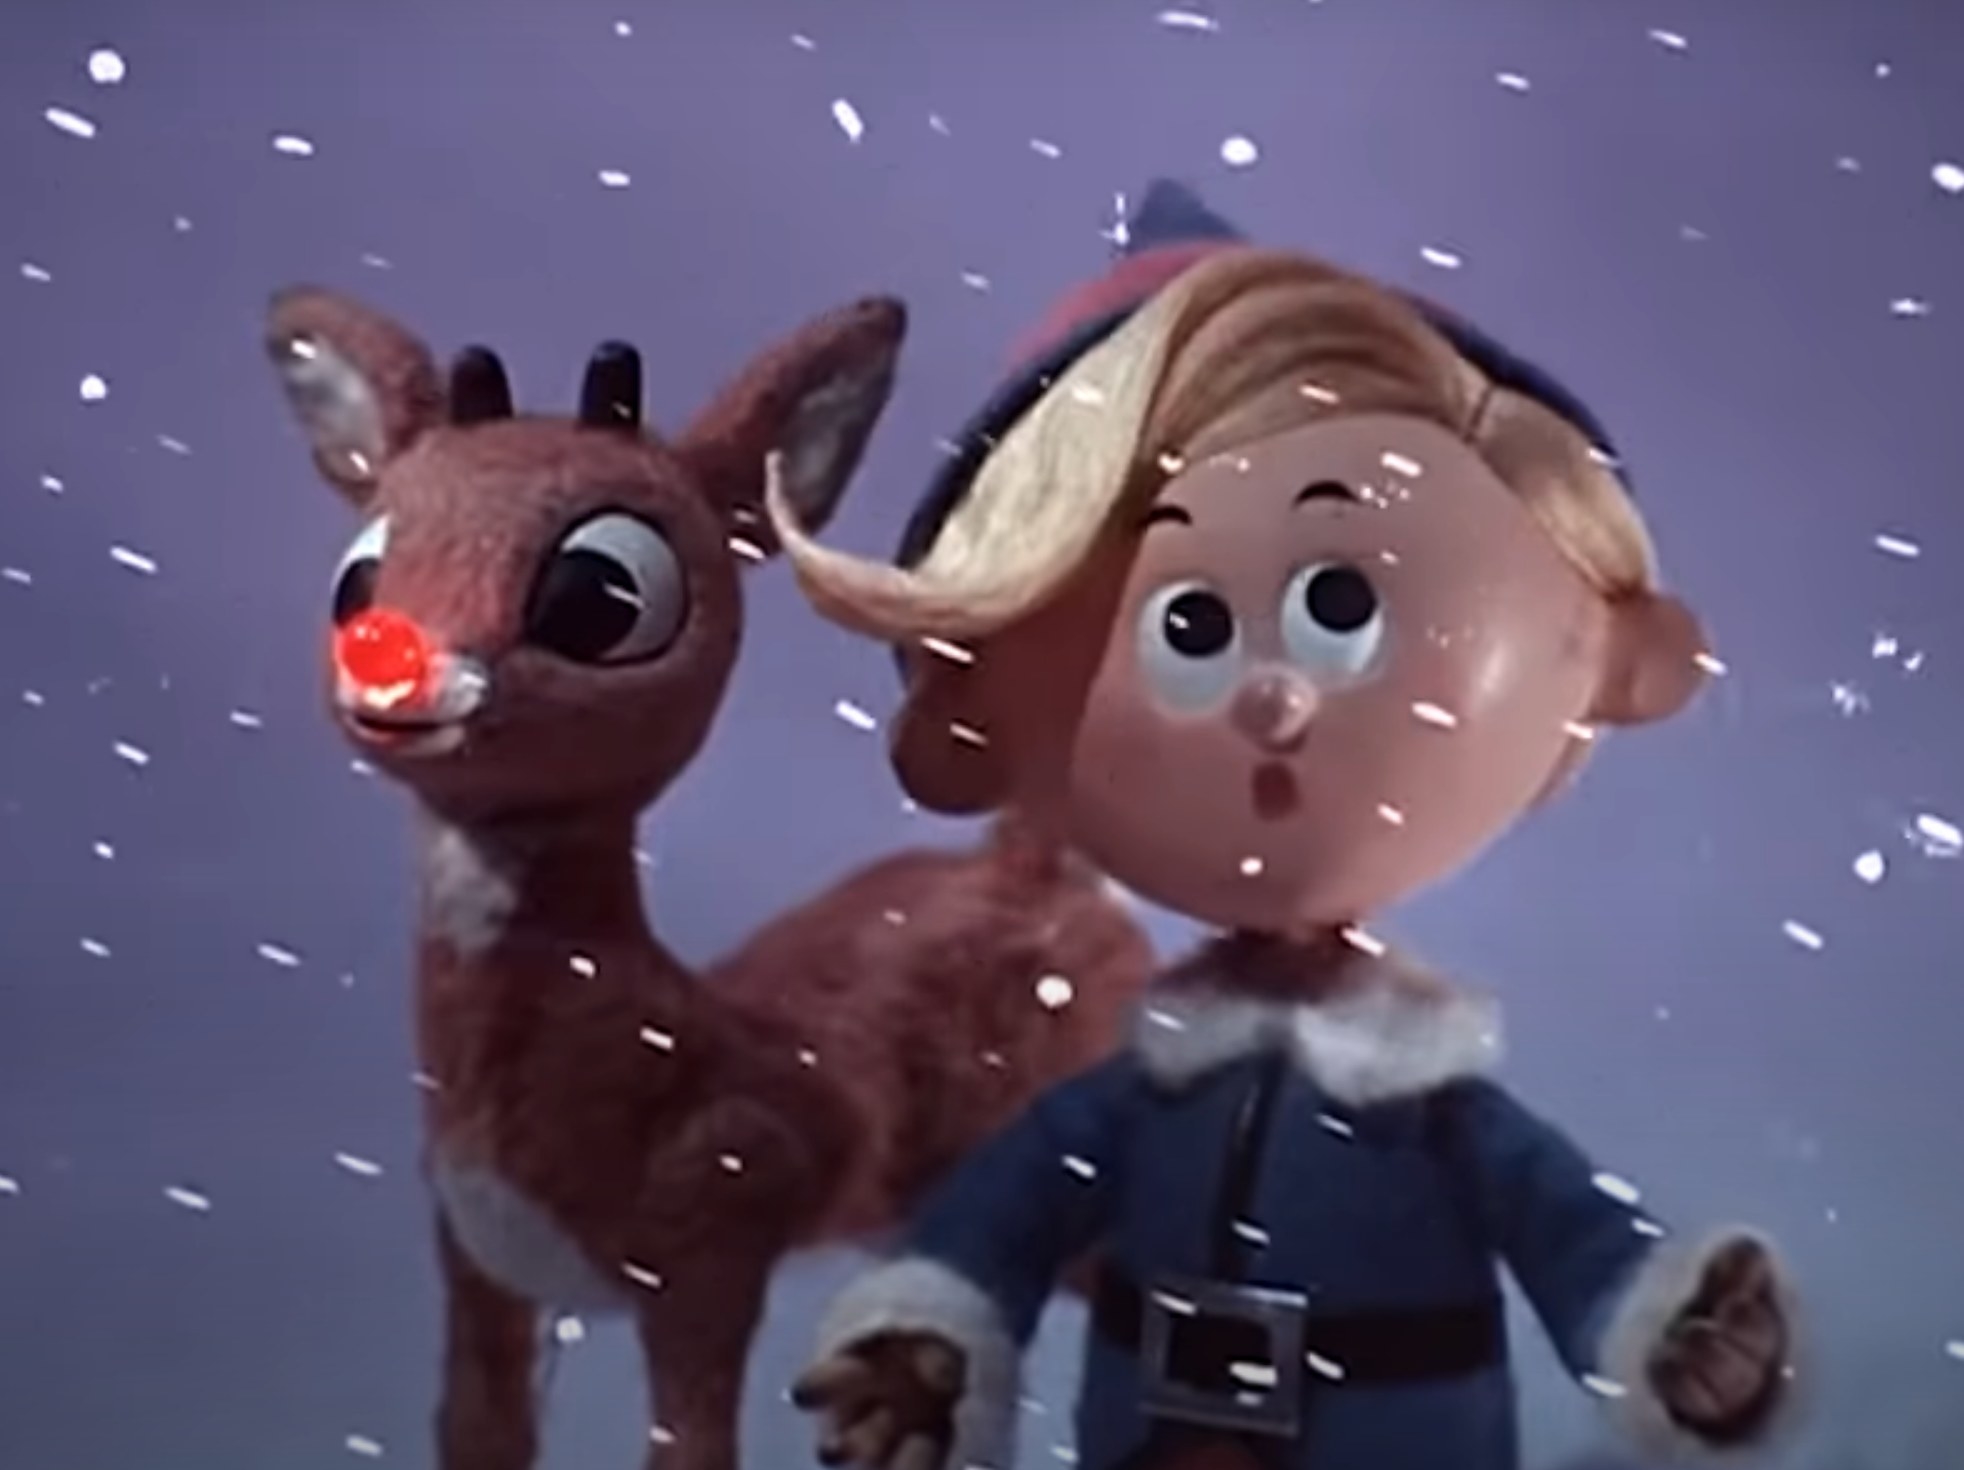 Rudolph and Hermey stand in the snow